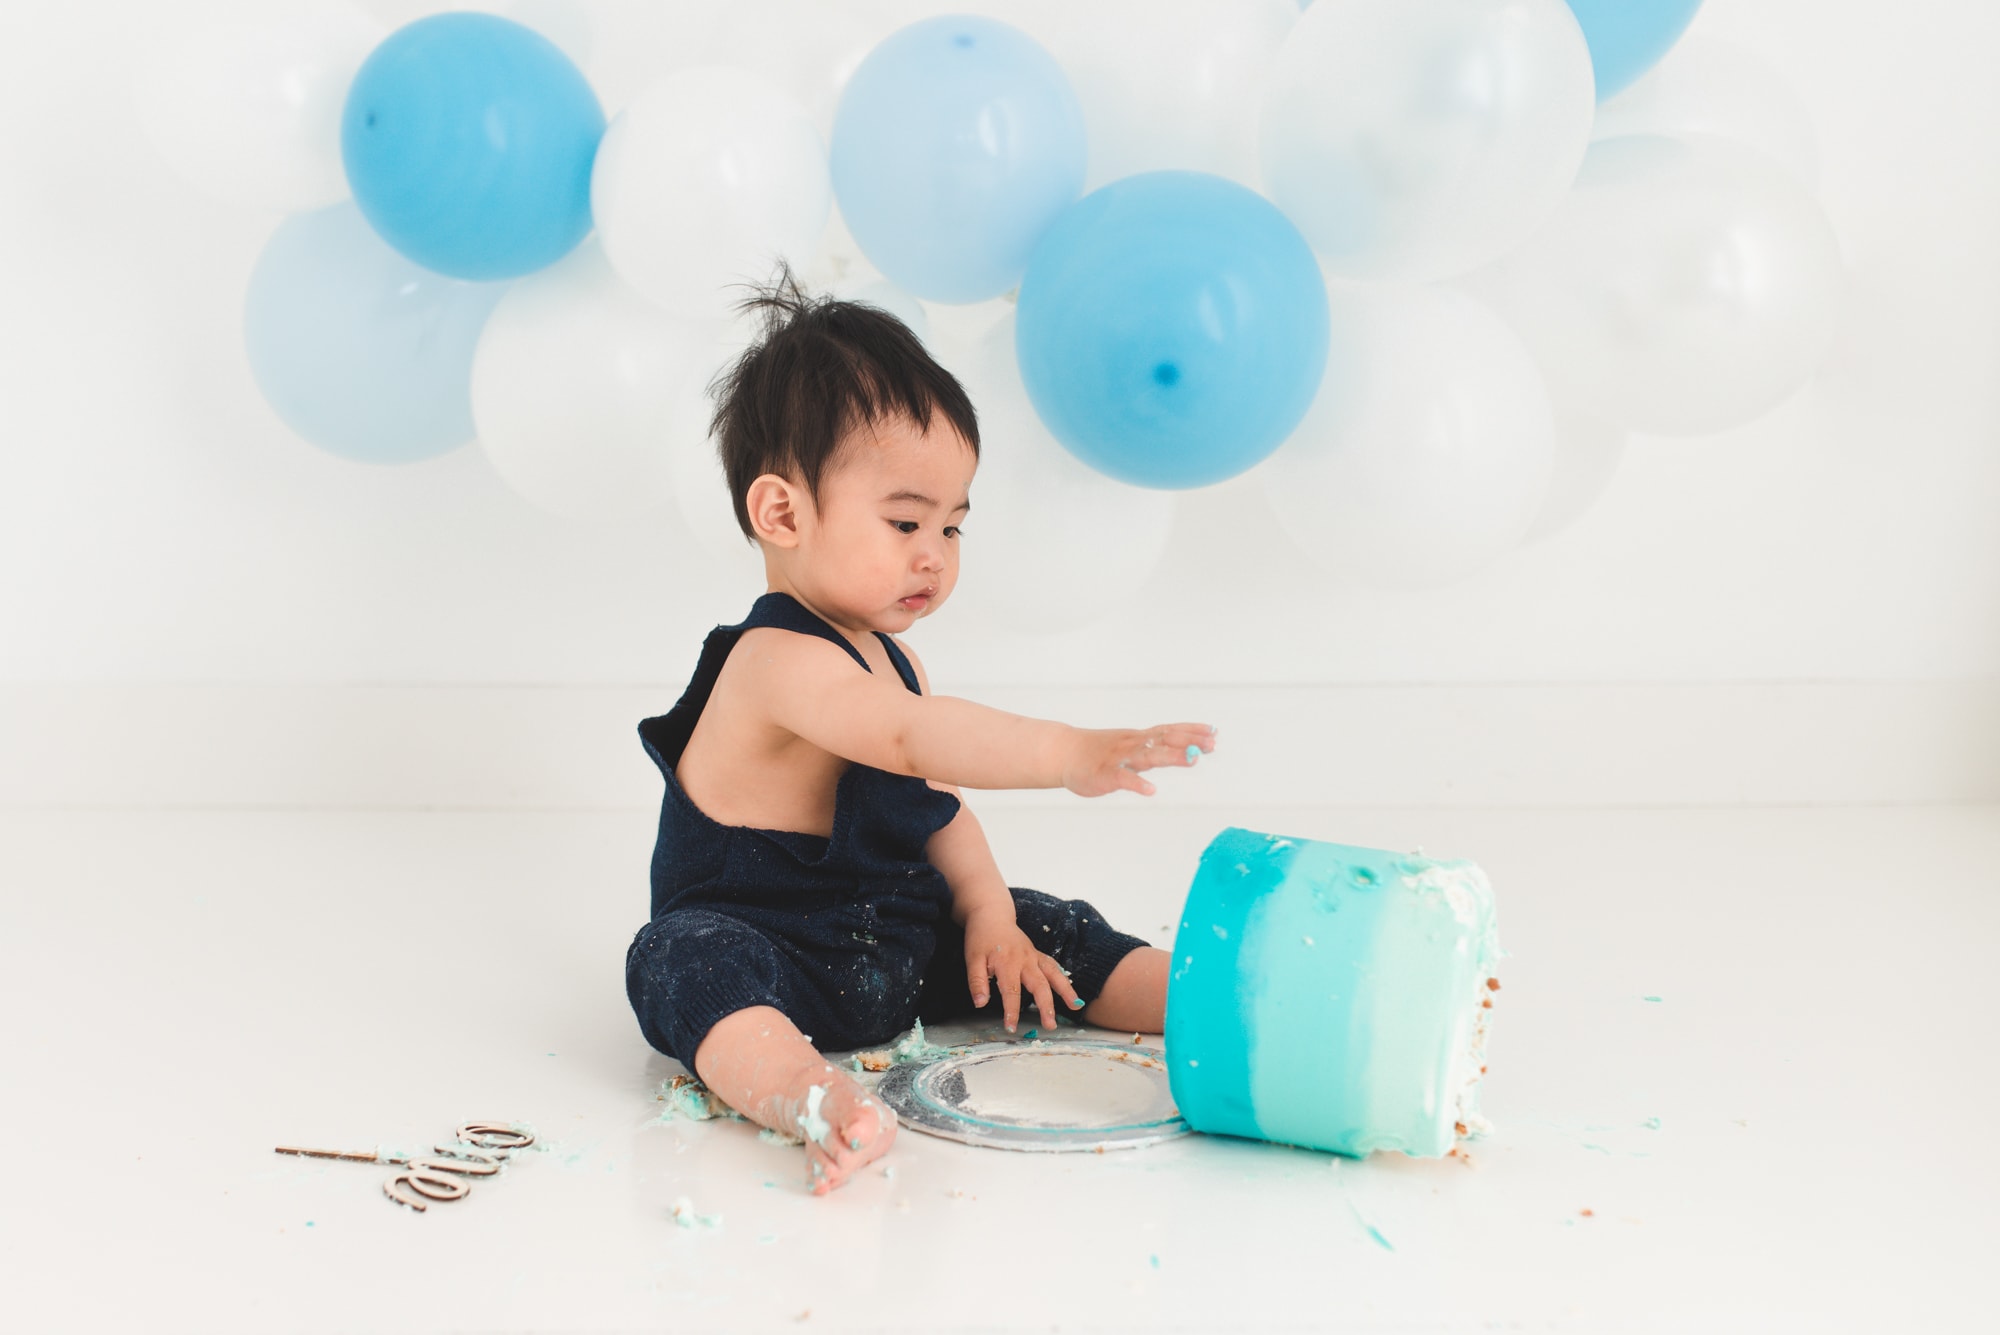 Funny moment when boy pushes his cake over at his first year cake smash celebration.